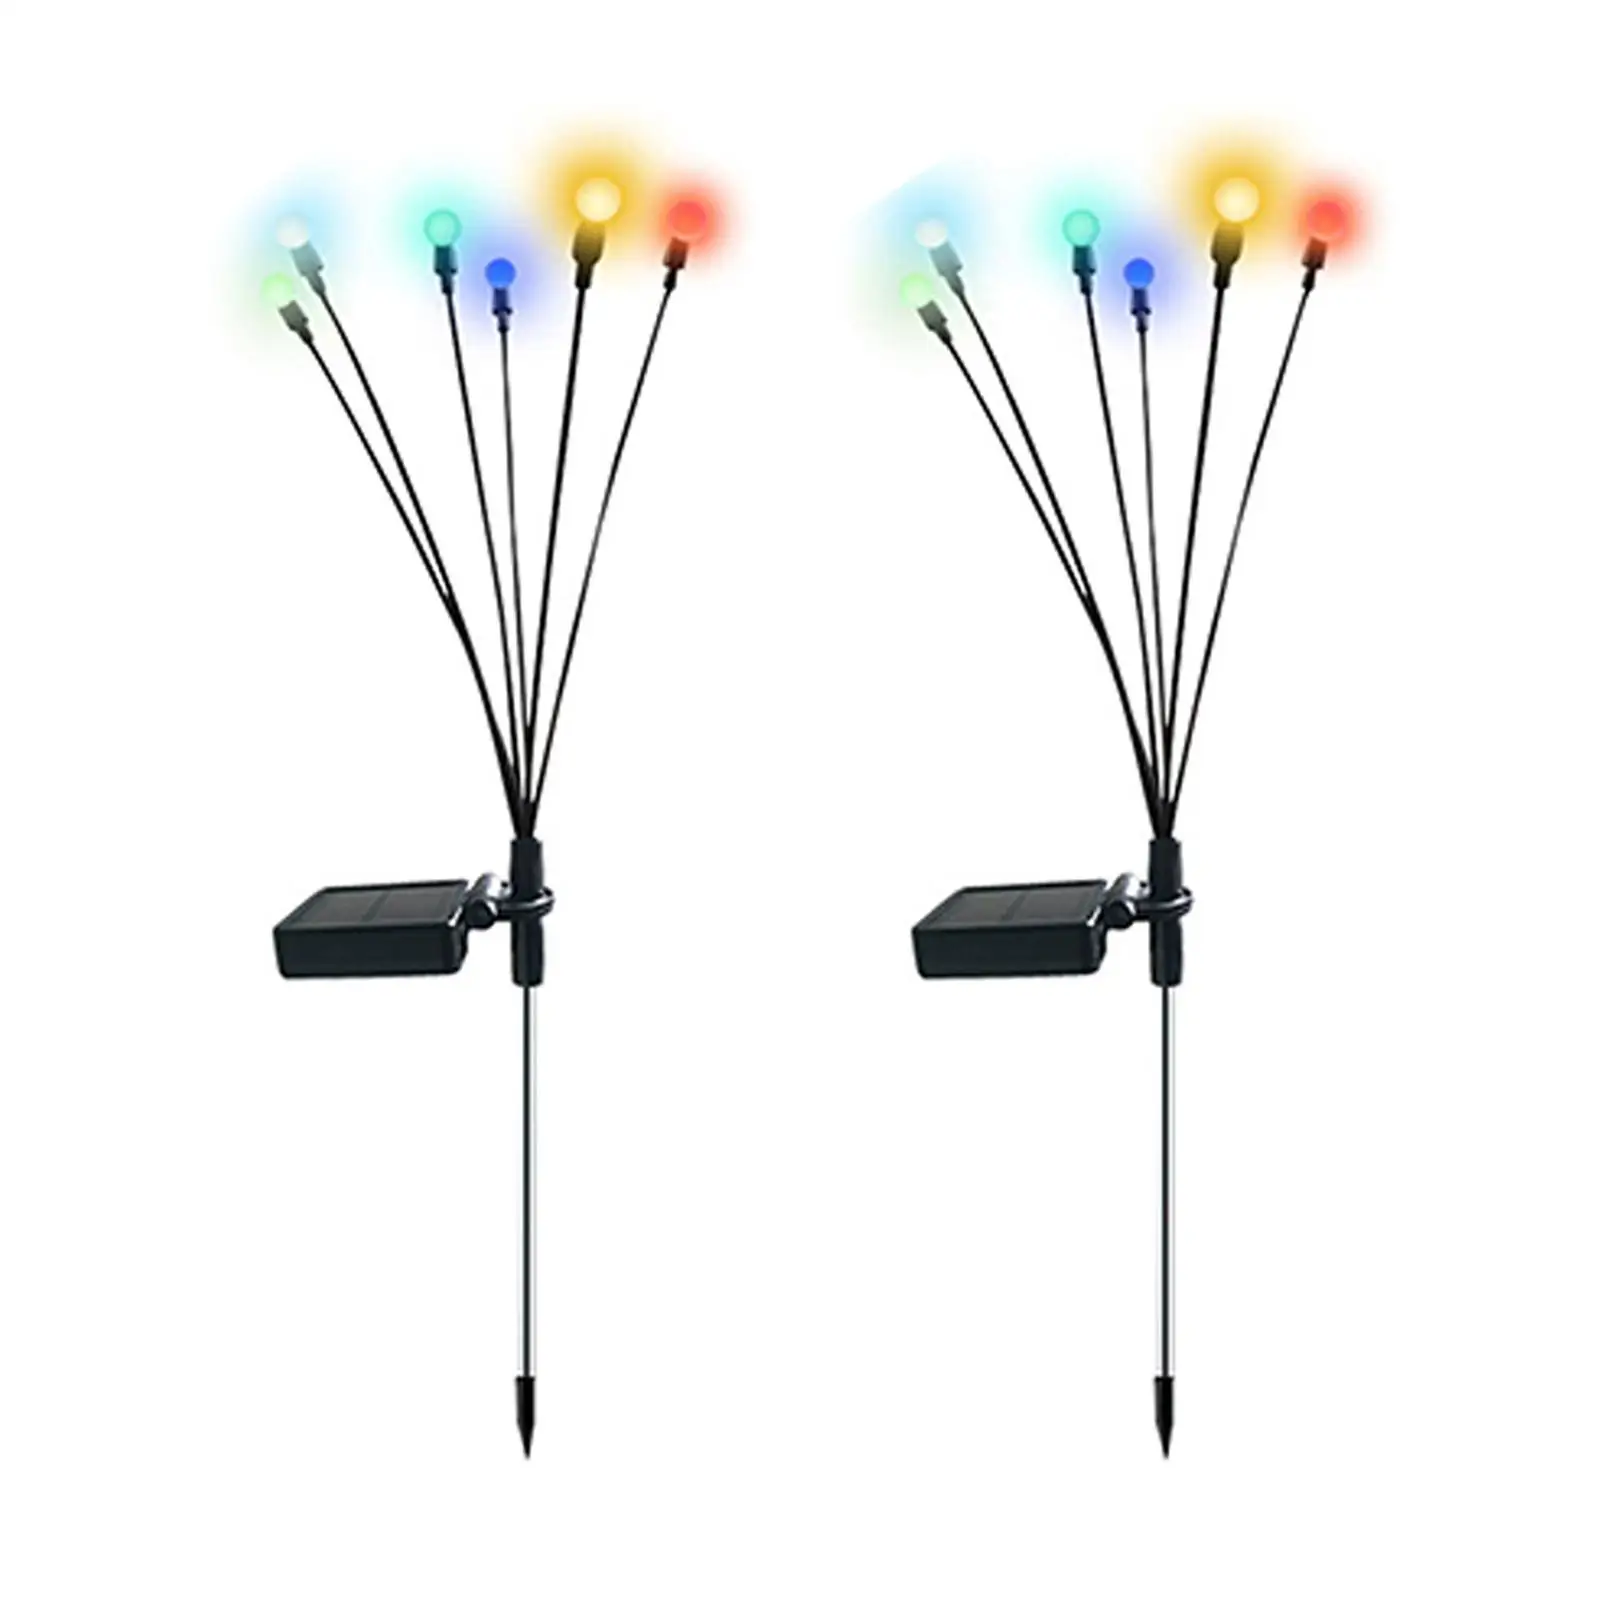 Solar Lights Waterproof Multi Color Ornamental Lights Swaying Light Decorative Lamp Stake for Yard Outdoor Pathway Garden